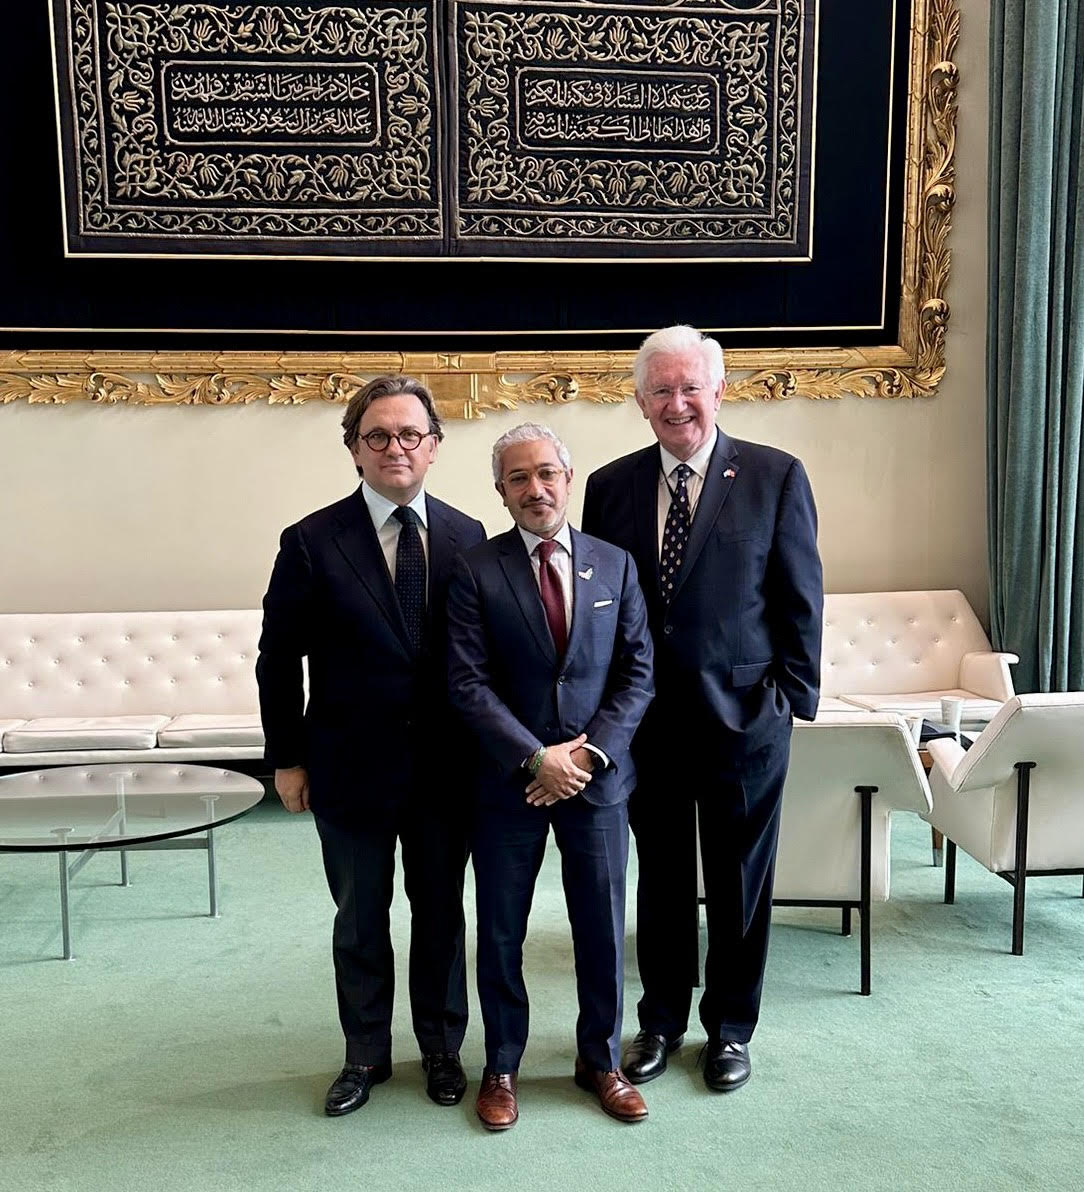 H.E. Ambassador Beresford-Hill accompanied by H.E. Ambassador Mr. Julien Brunie, met with H.E. Ambassador Mr. Mohamad Issa Abushahab, DPR of the Permanent Mission of the UAE to the UN